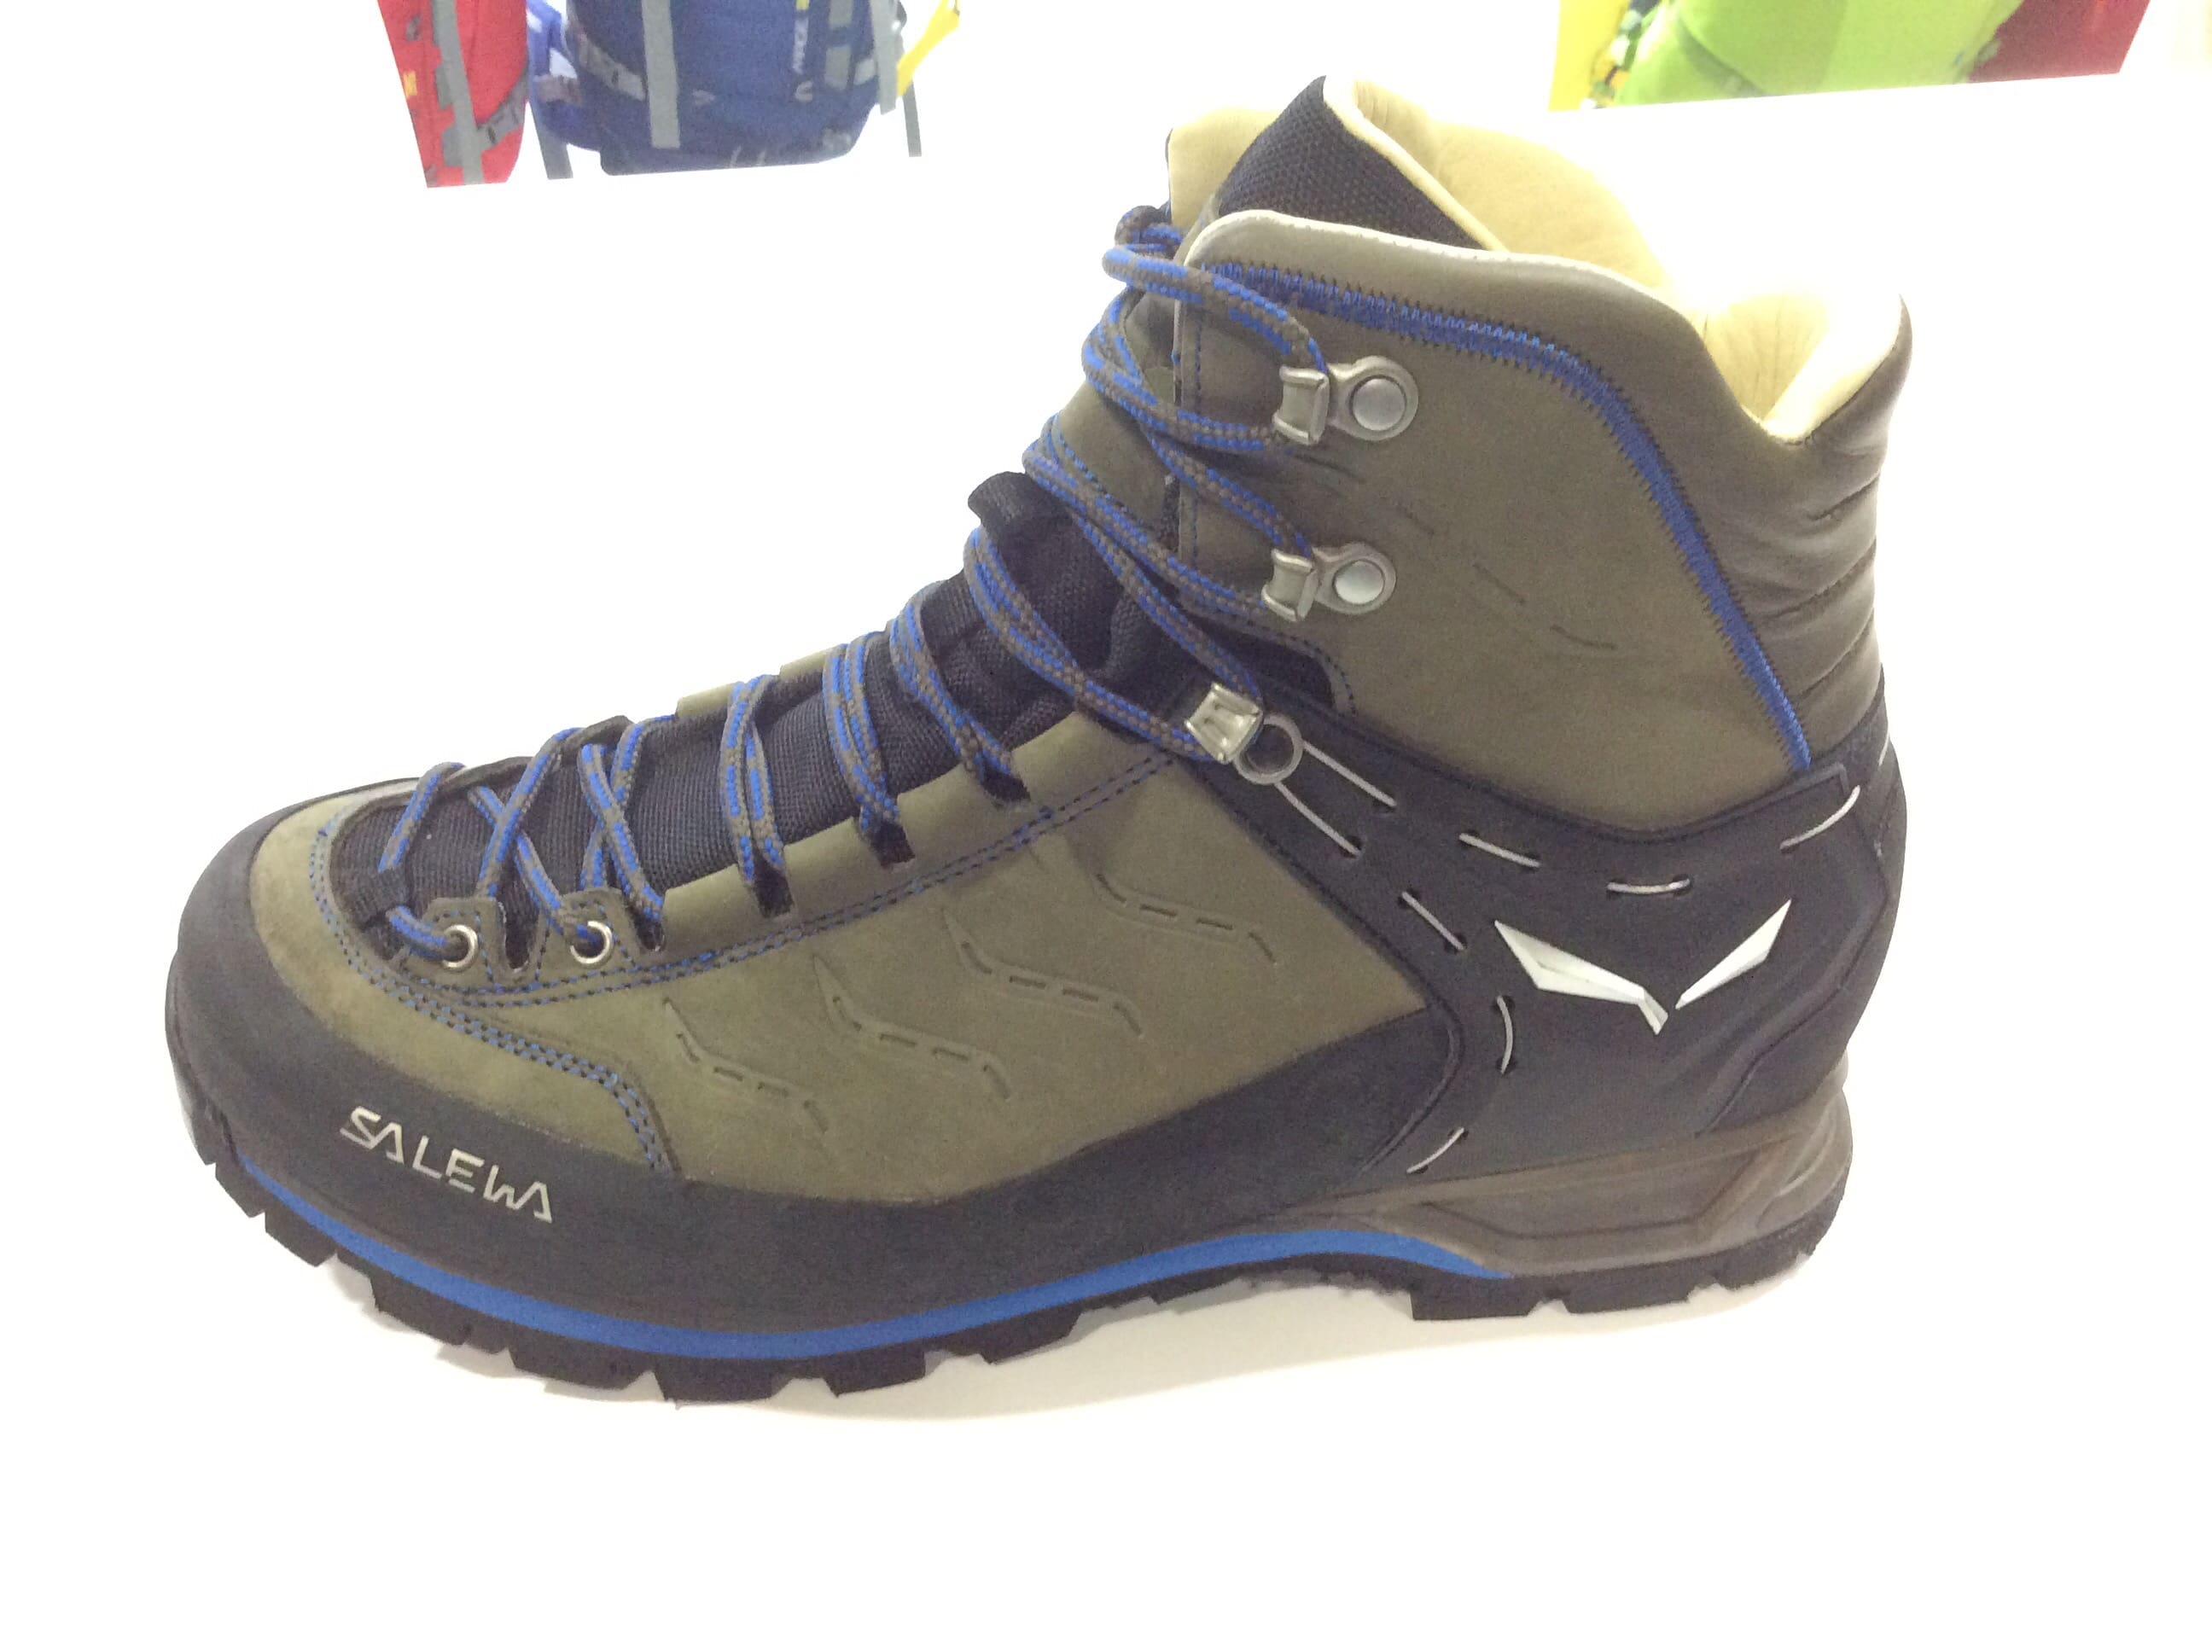 OR - Salewa - Soldier Systems Daily